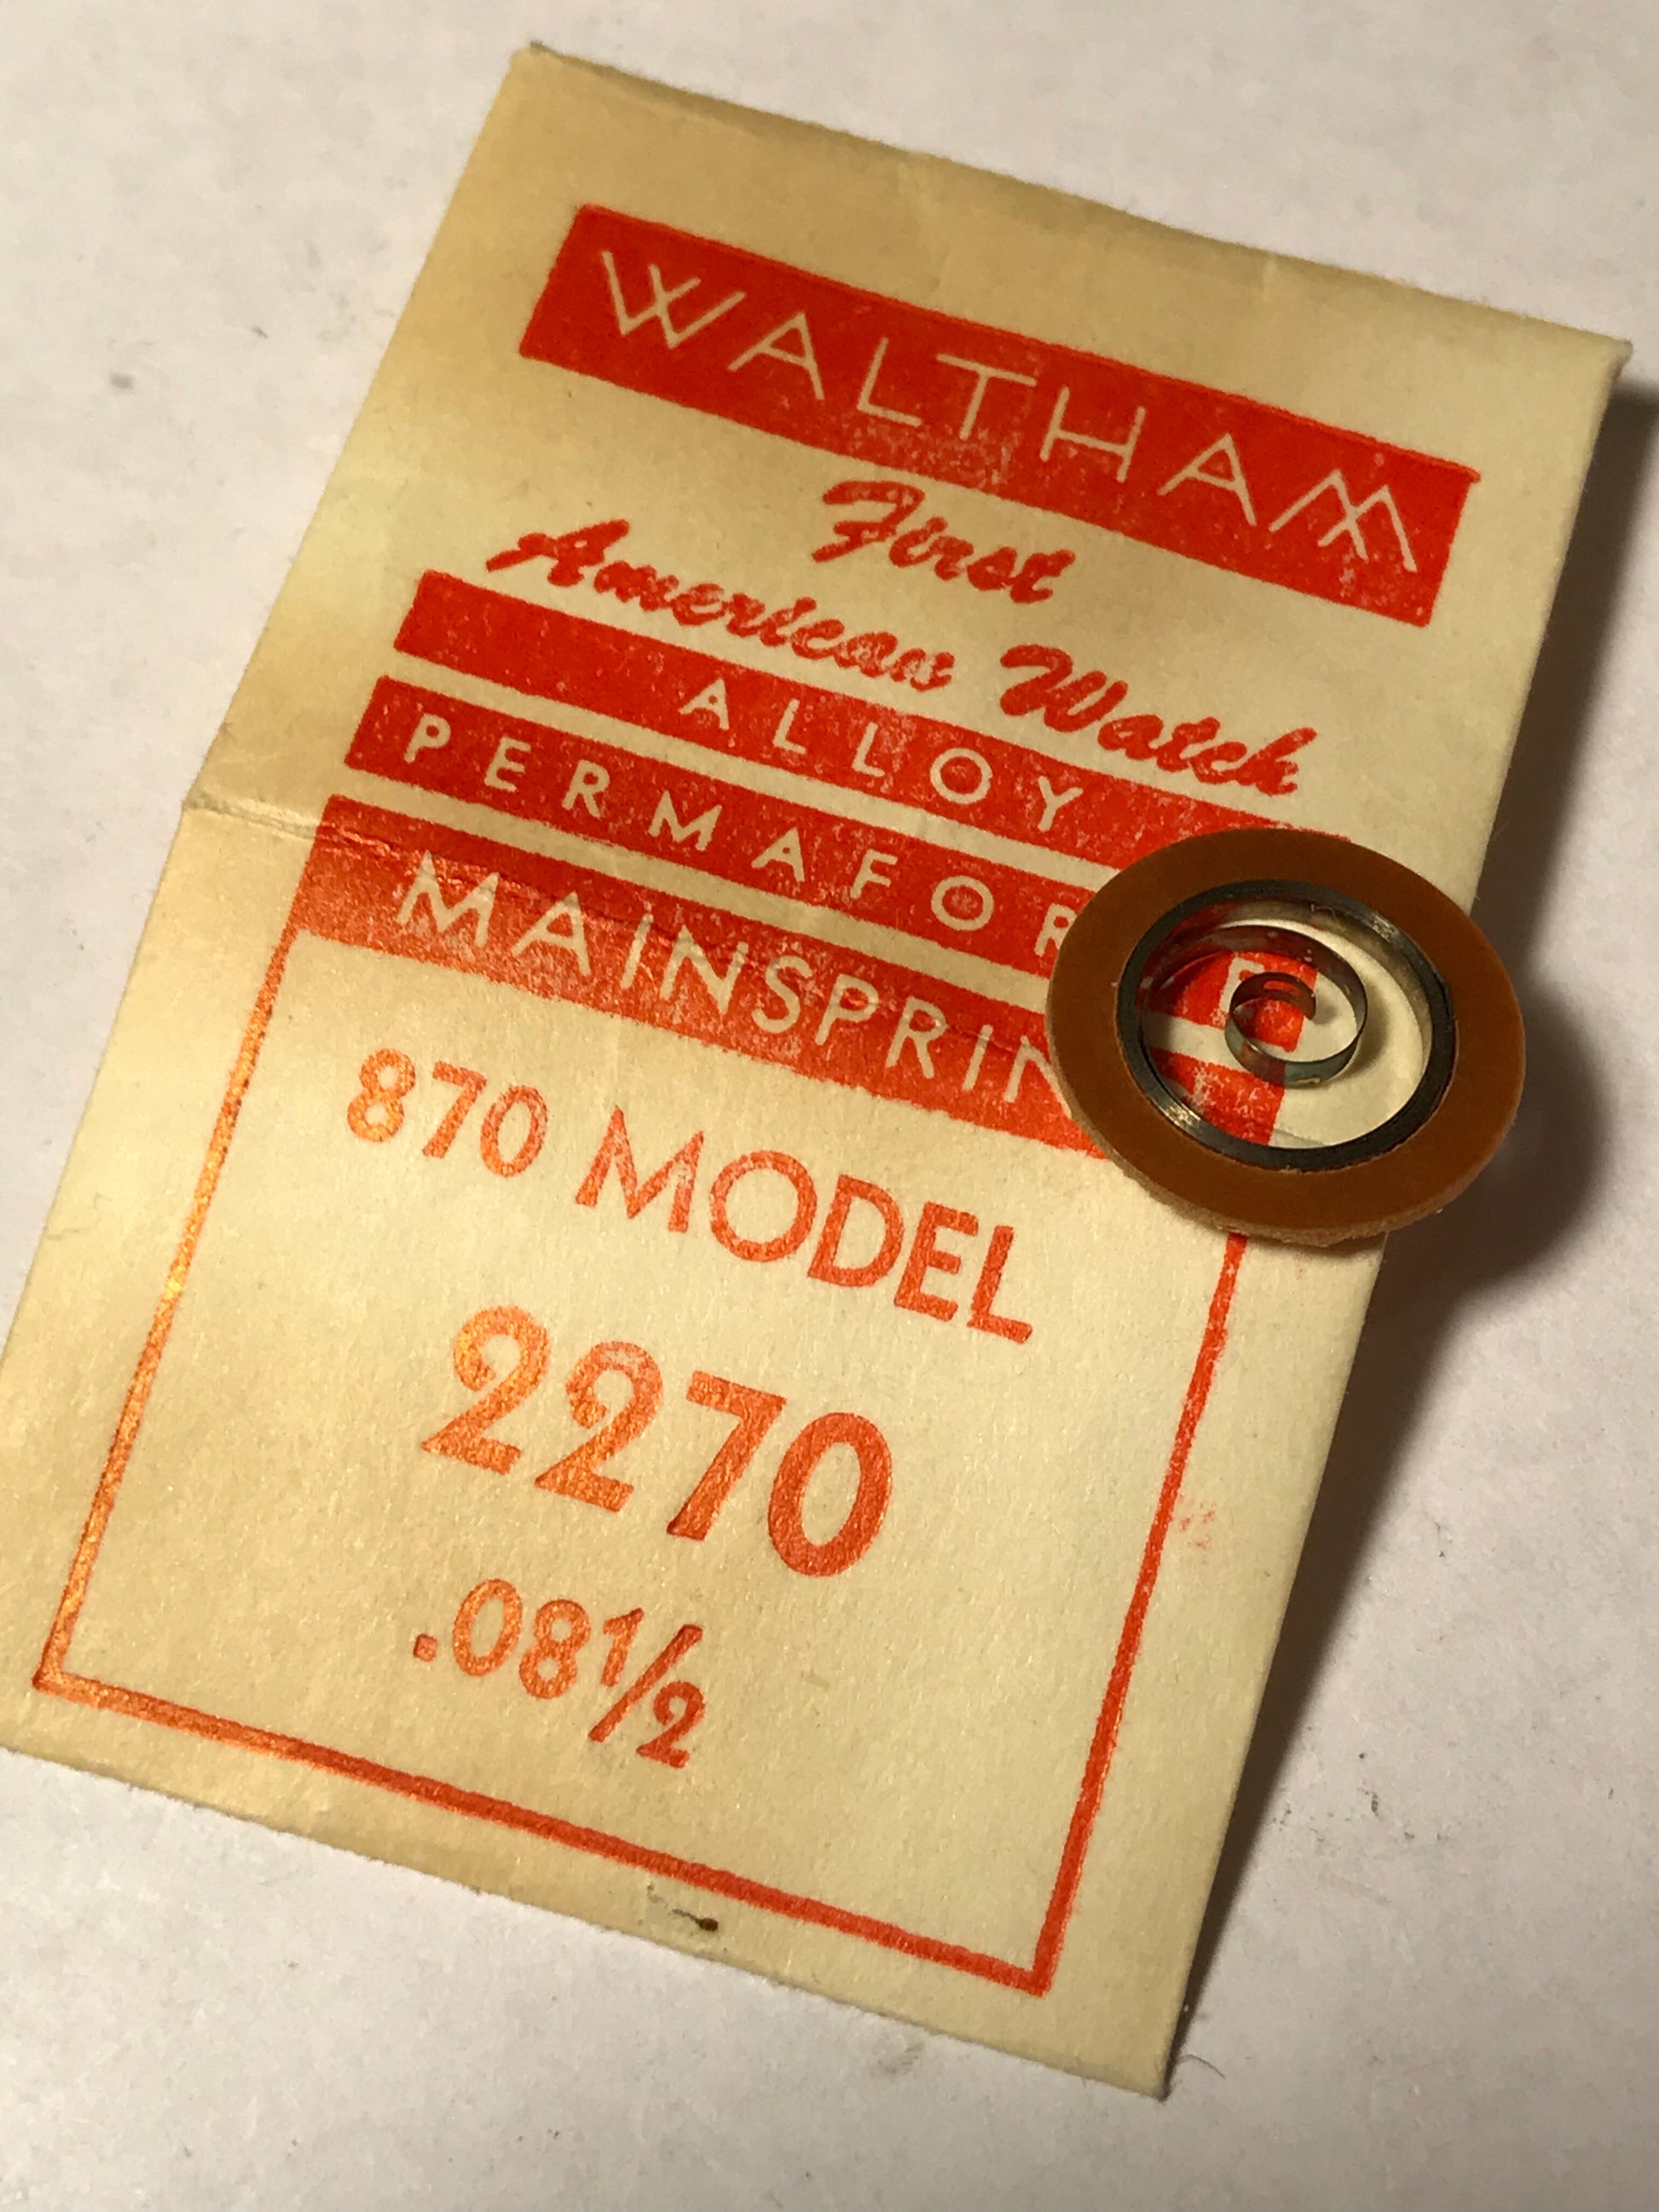 Waltham Factory Mainspring for Model 870 - 875 Movements No. 2270 / 2242- Alloy